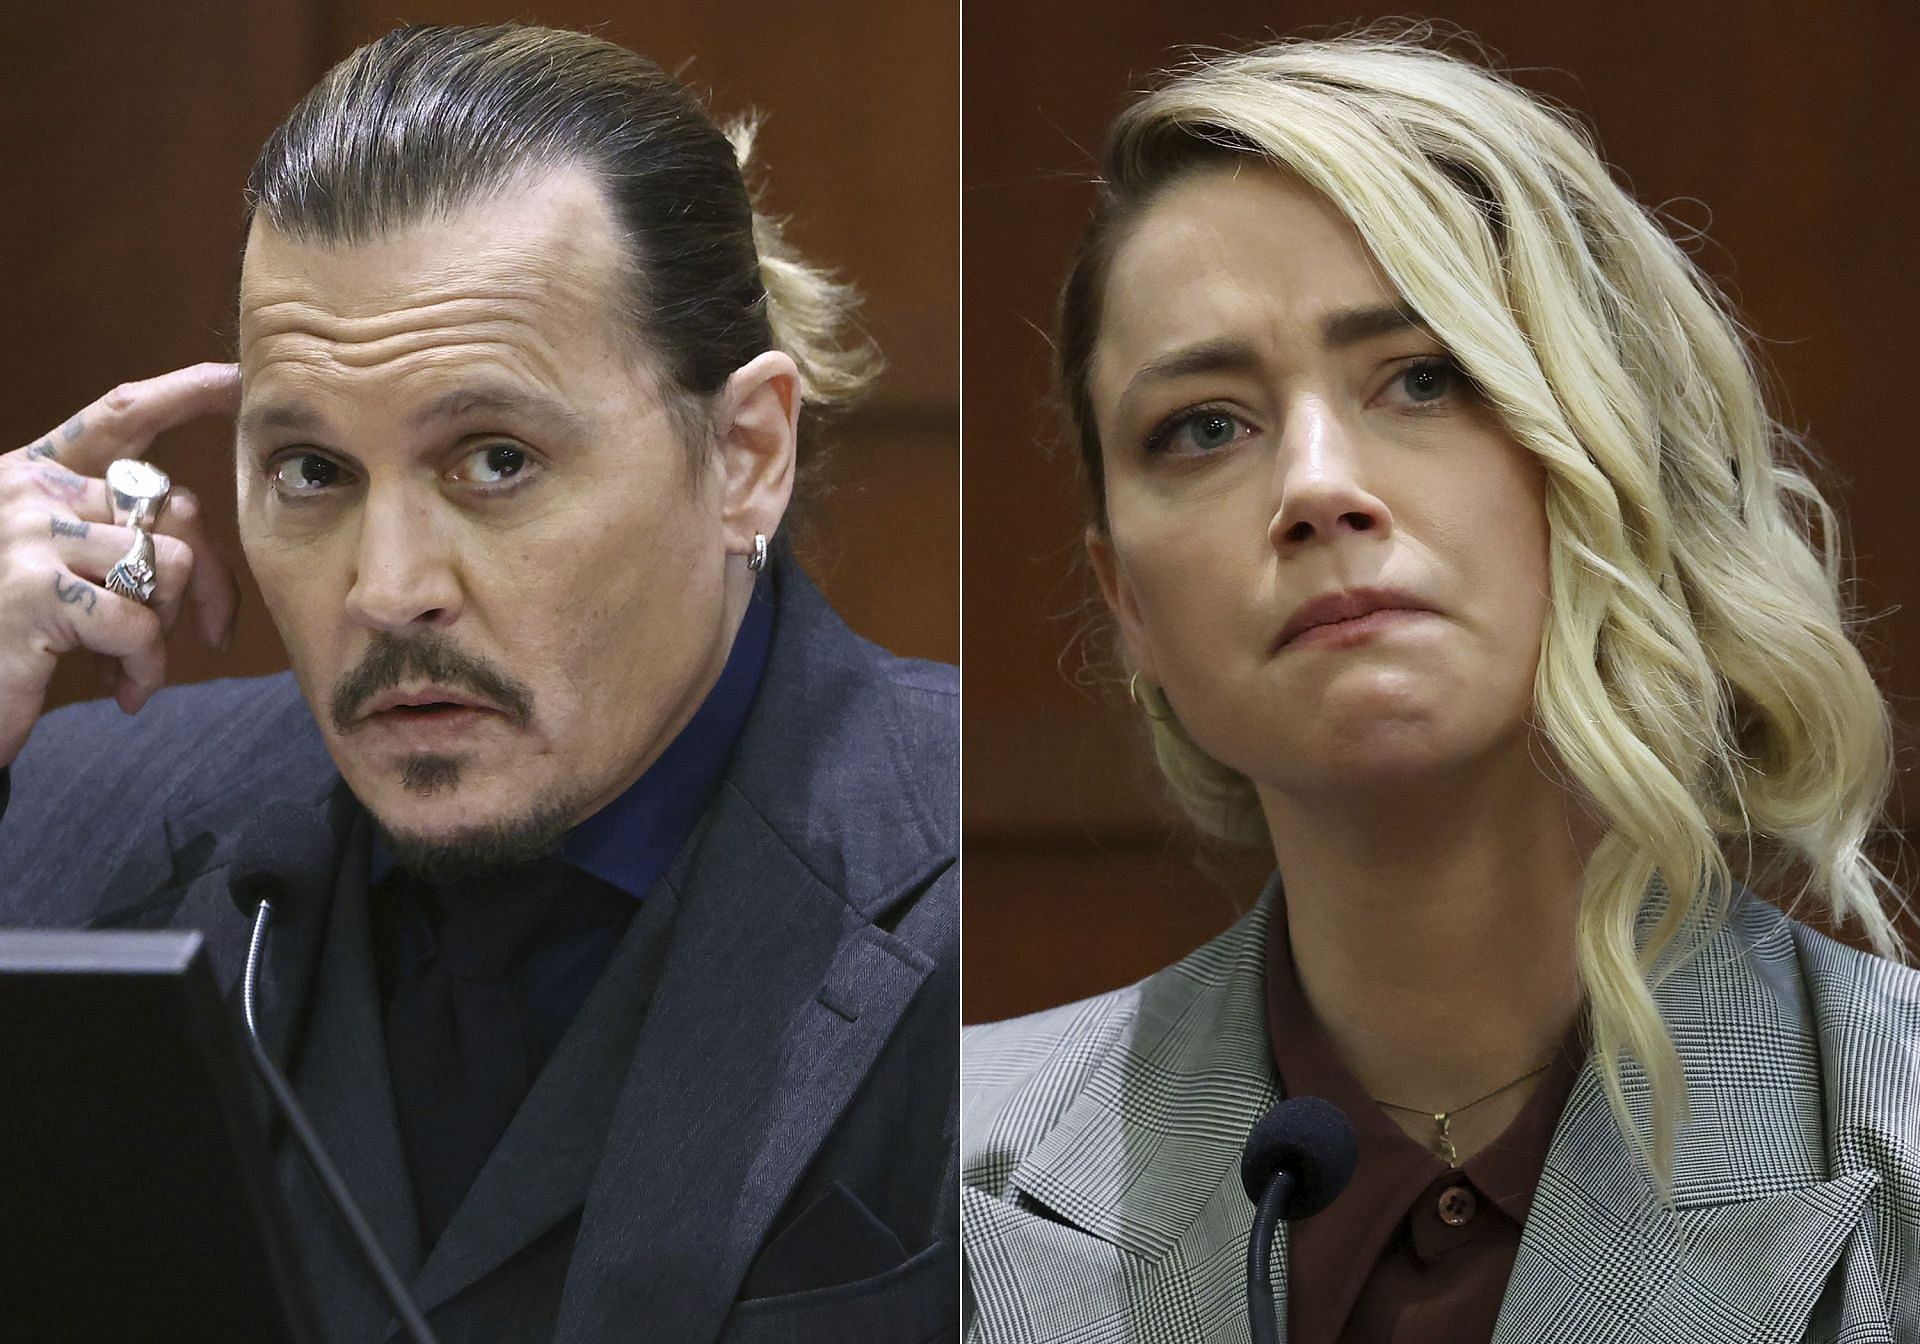 Johnny Depp and Amber Heard during their defamation trial (Images via Associated Press)